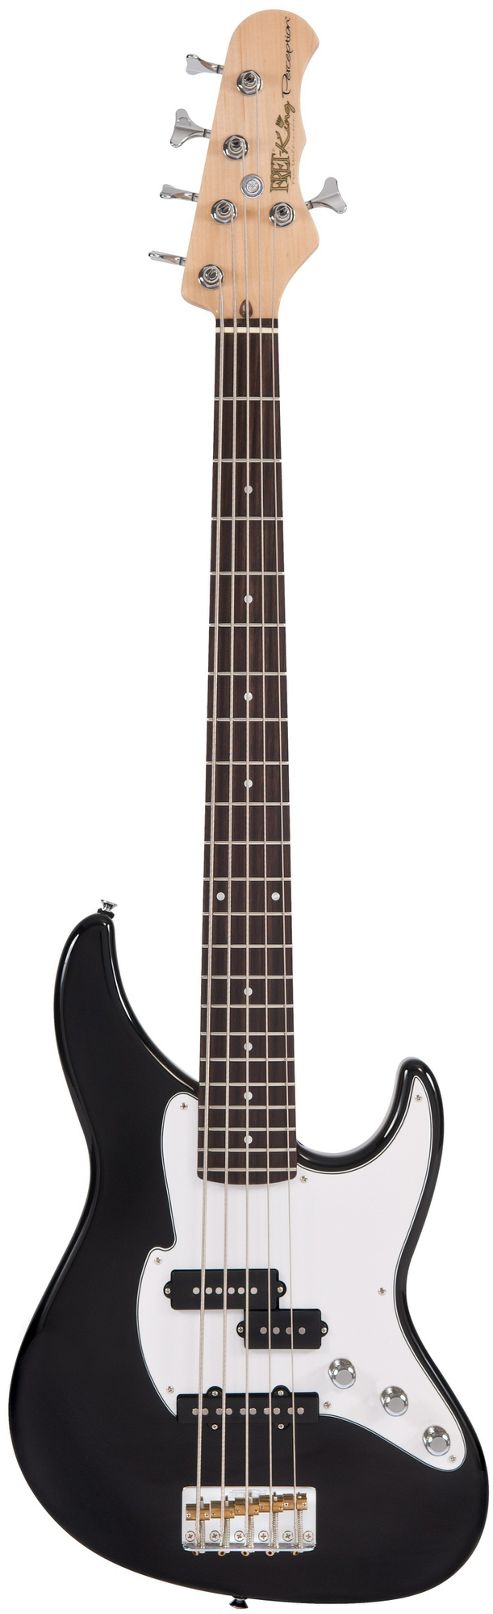 Image of Stagg Standard Passive Electric Bass Guitar